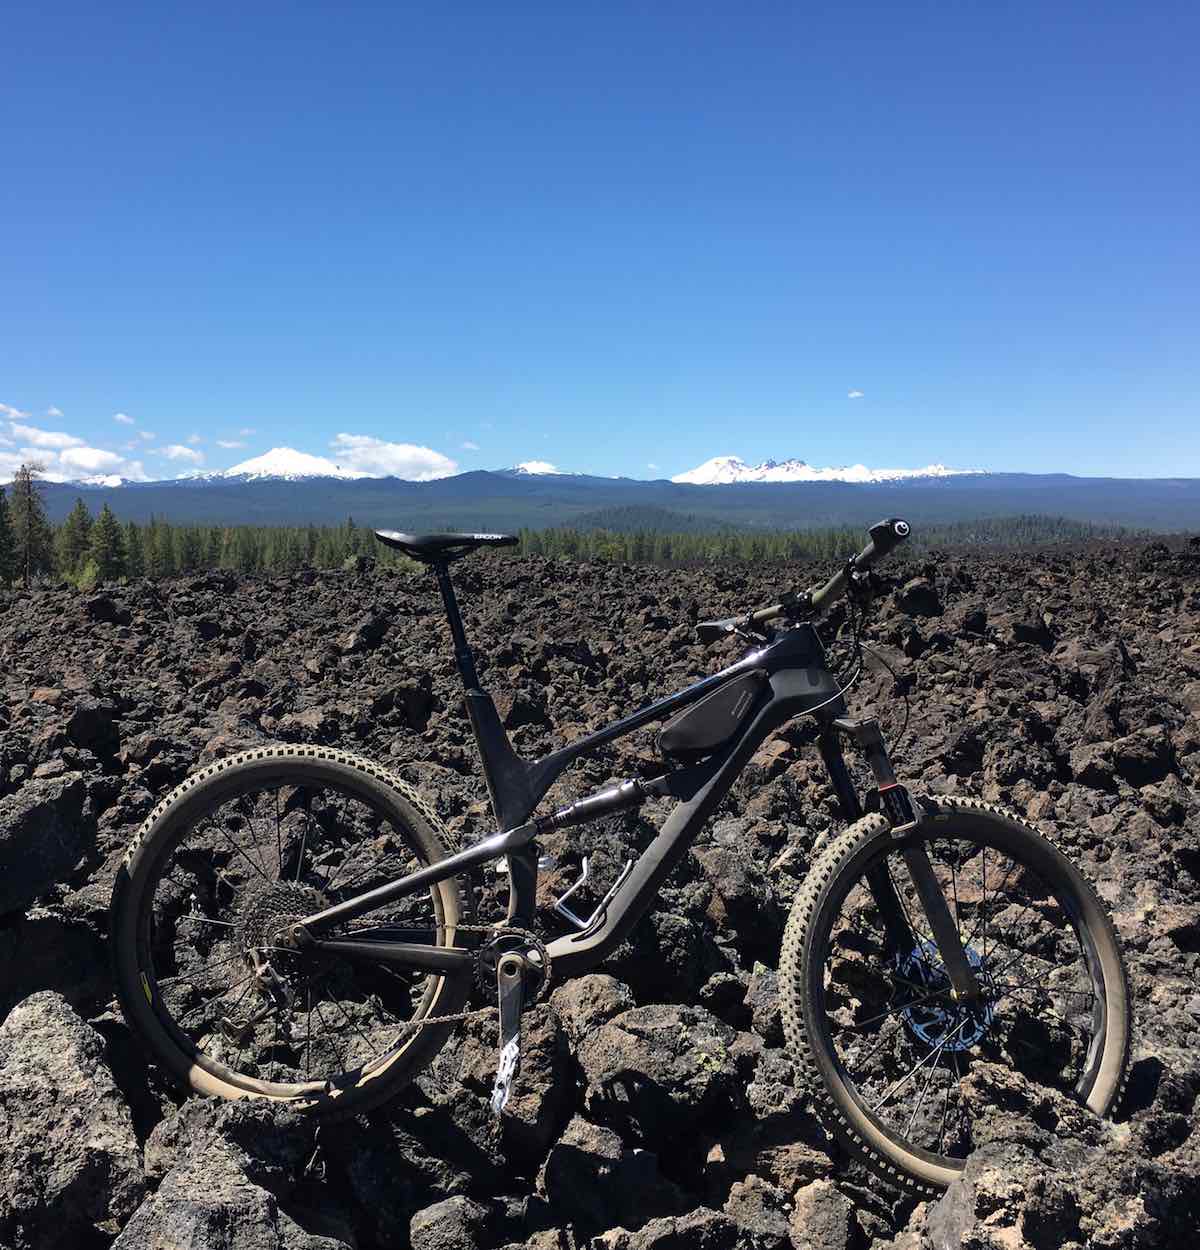 bikerumor pic of the day lava flow south of bend, oregon, mountain bike trails.